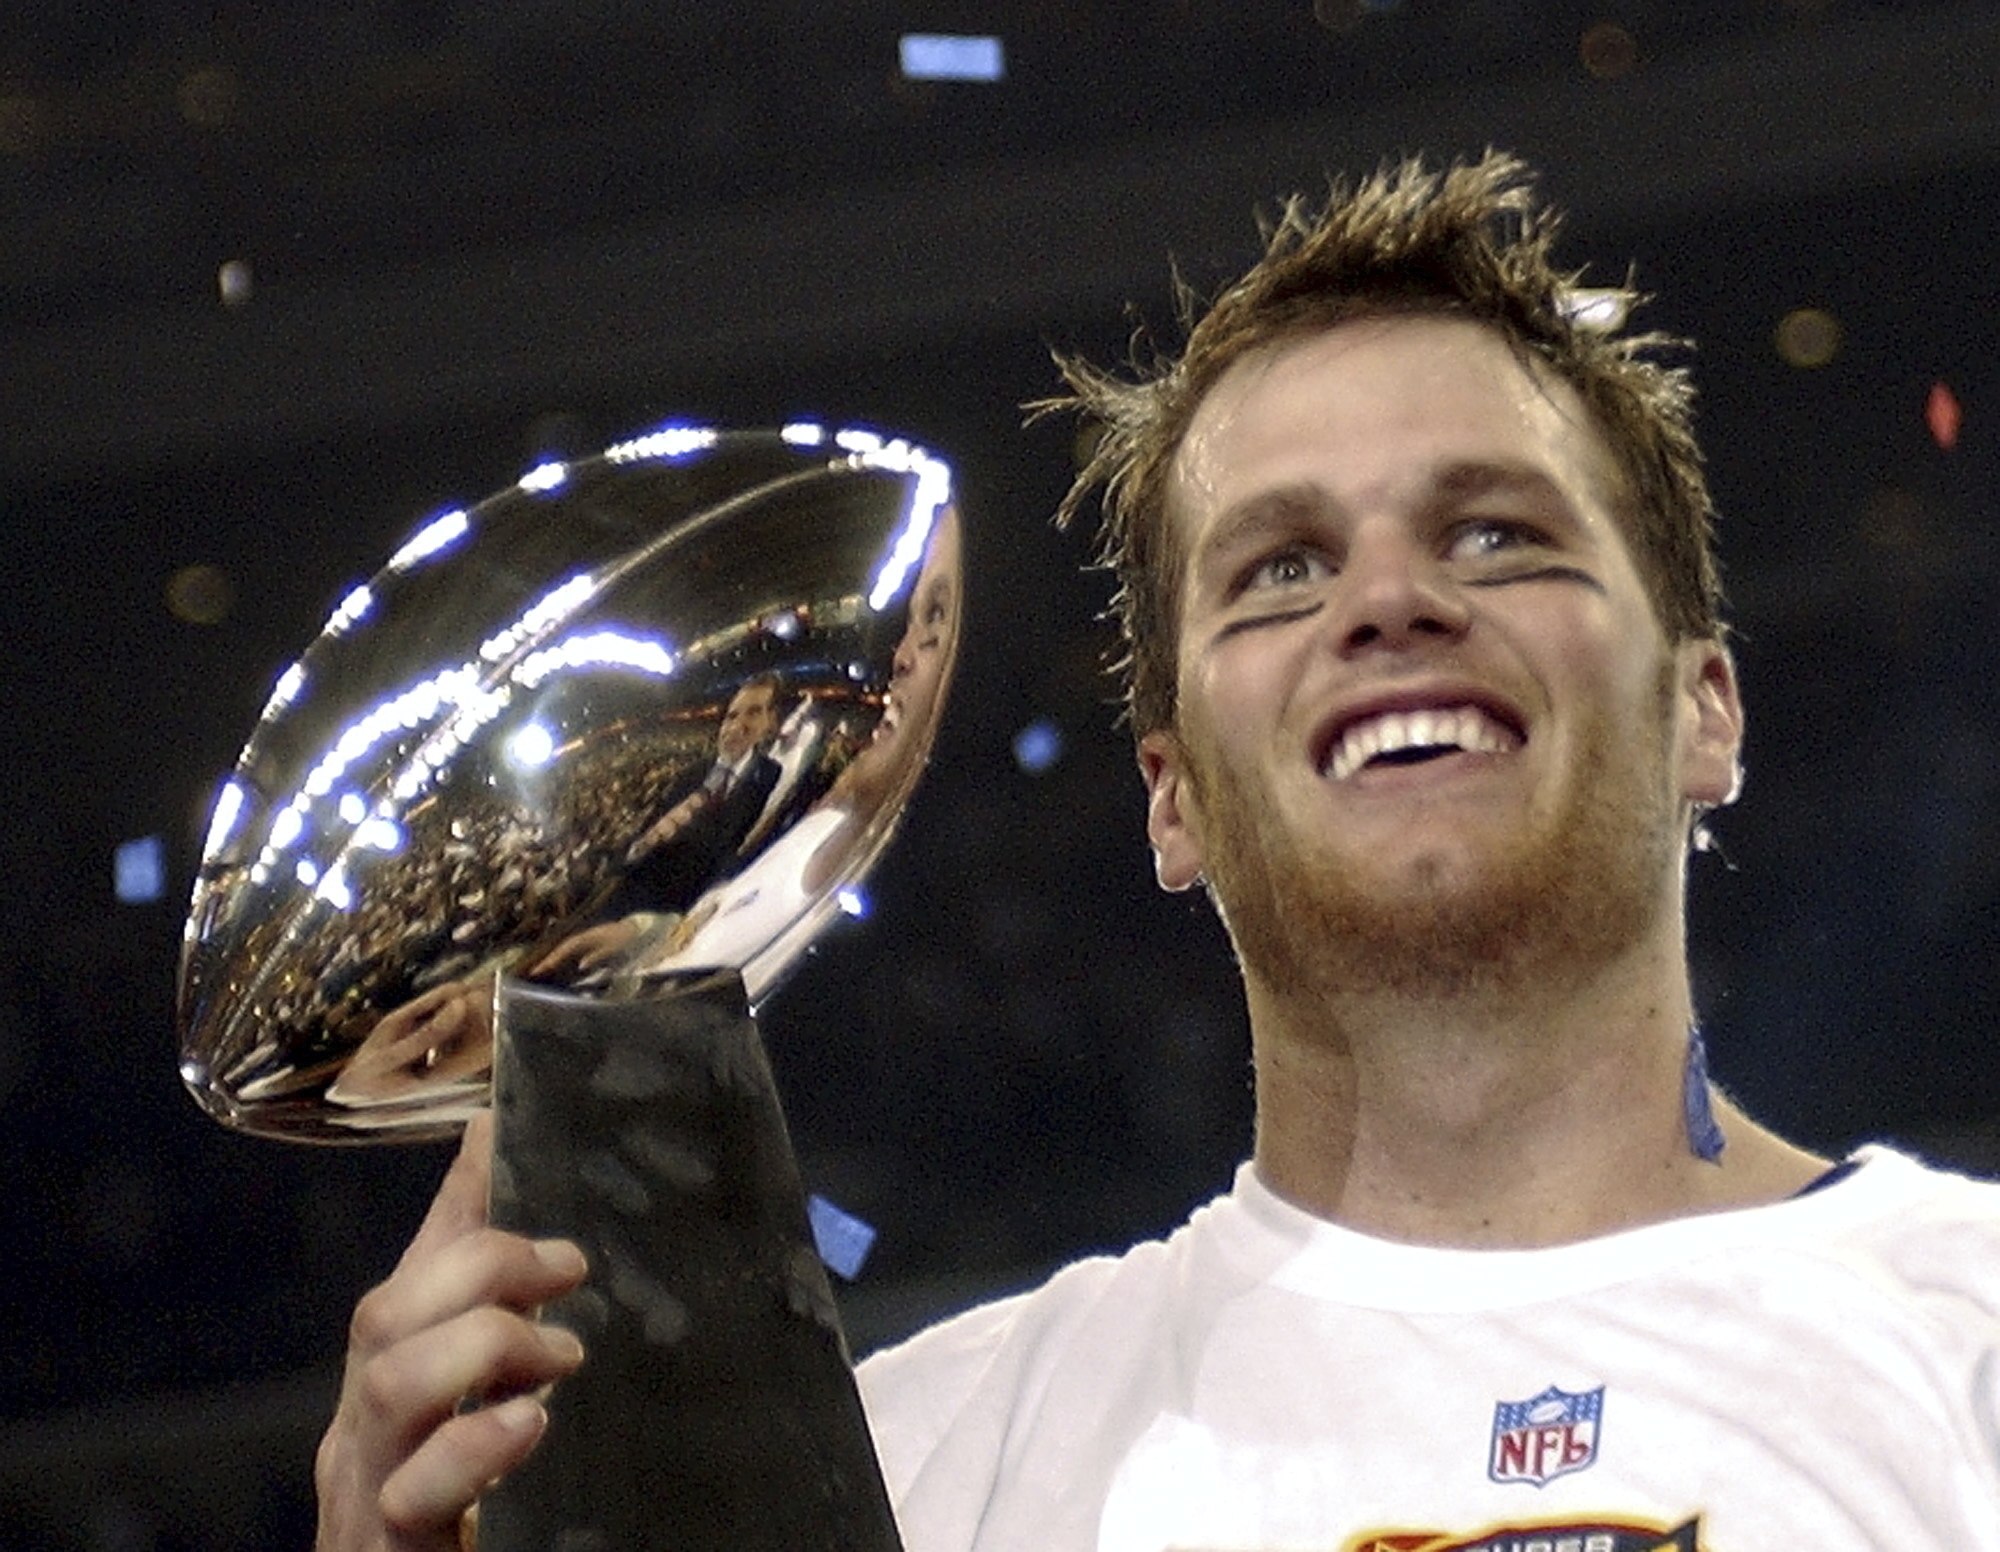 Tom Brady holds the Vince Lombardi Trophy after leading the New England Patriots to victory in the 2004 Super Bowl. Photo: AP